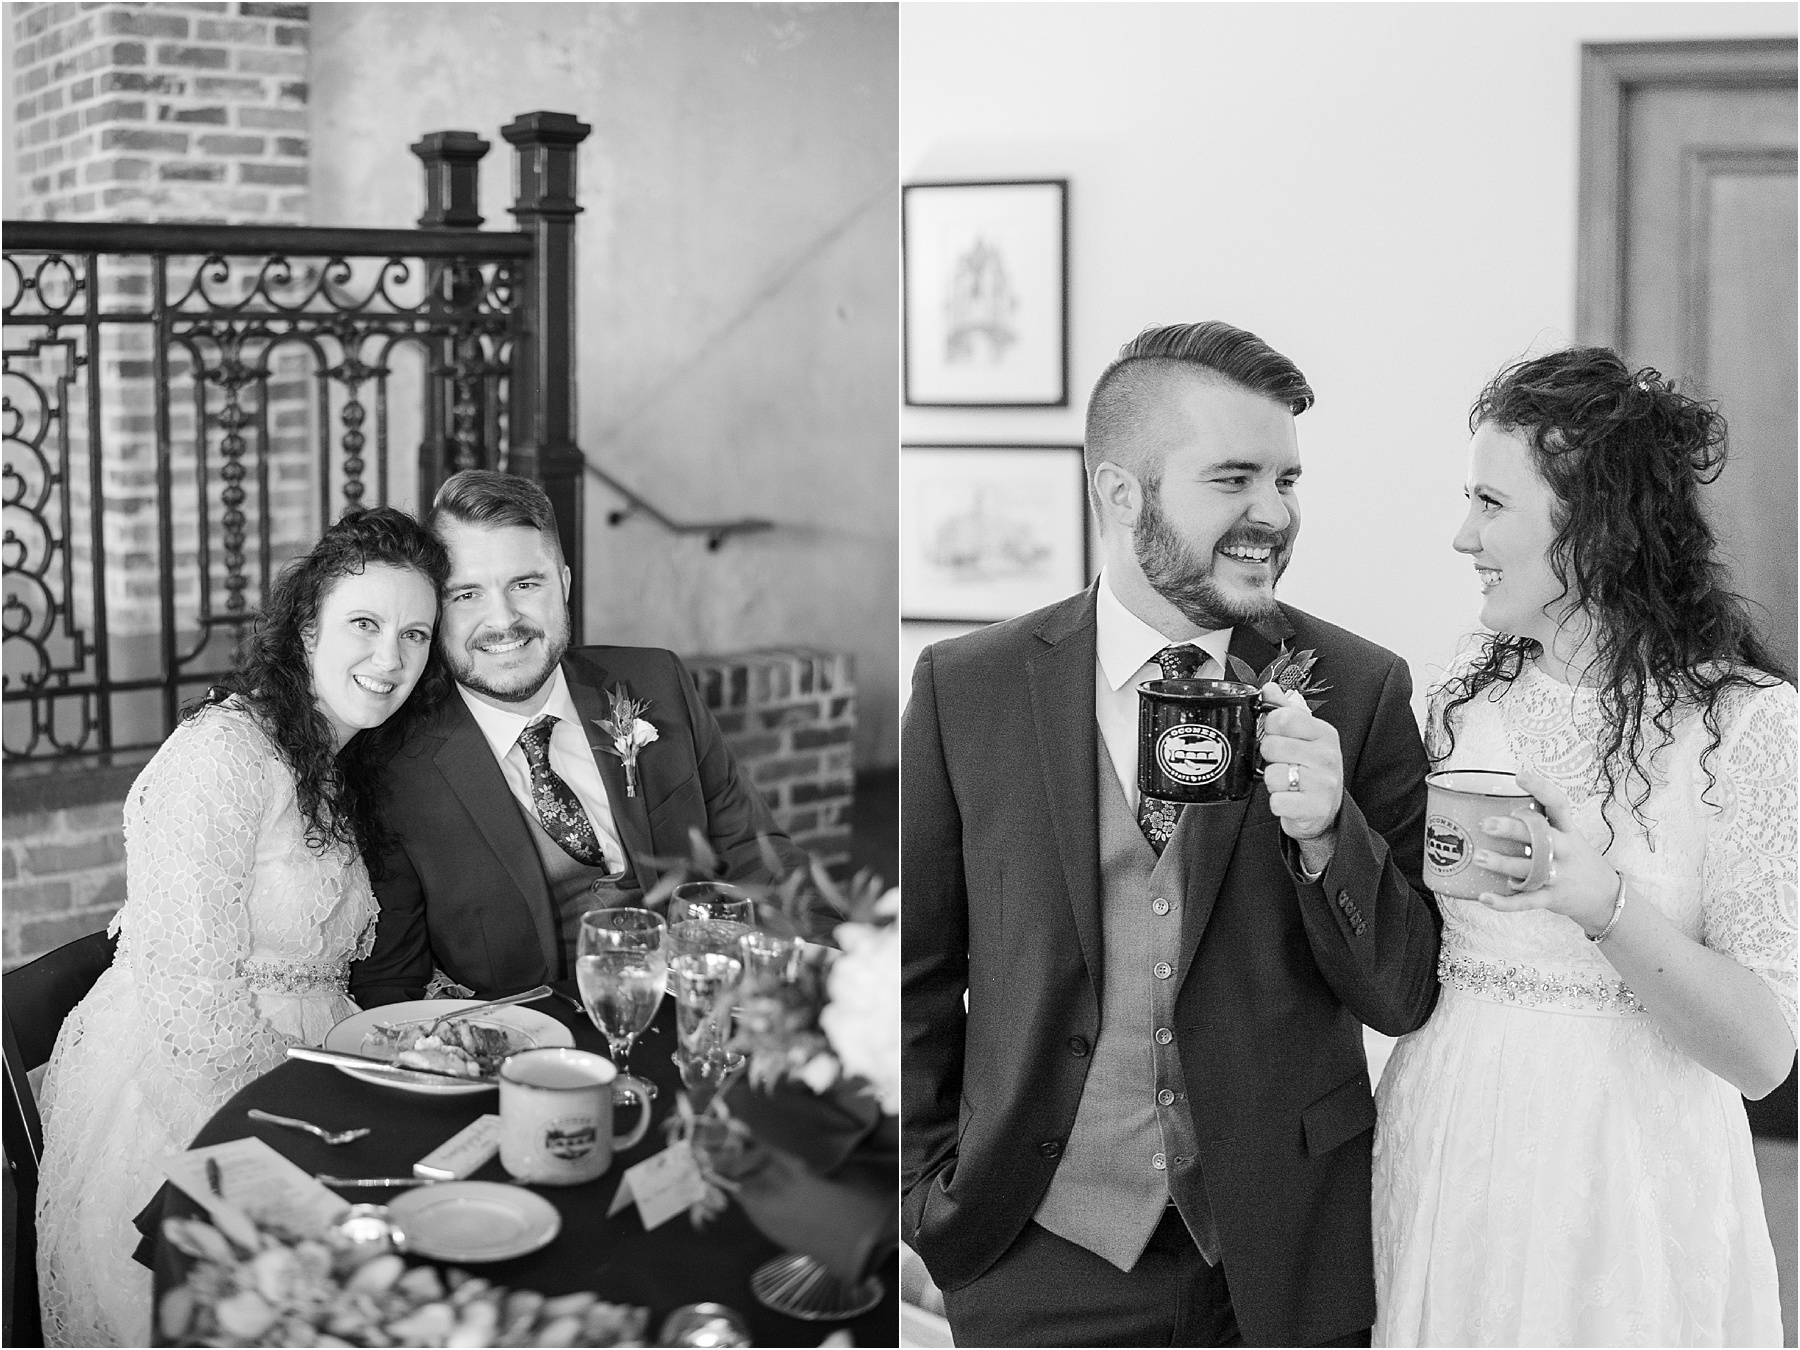 married couple looks at each other in wedding attire holding coffee mugs